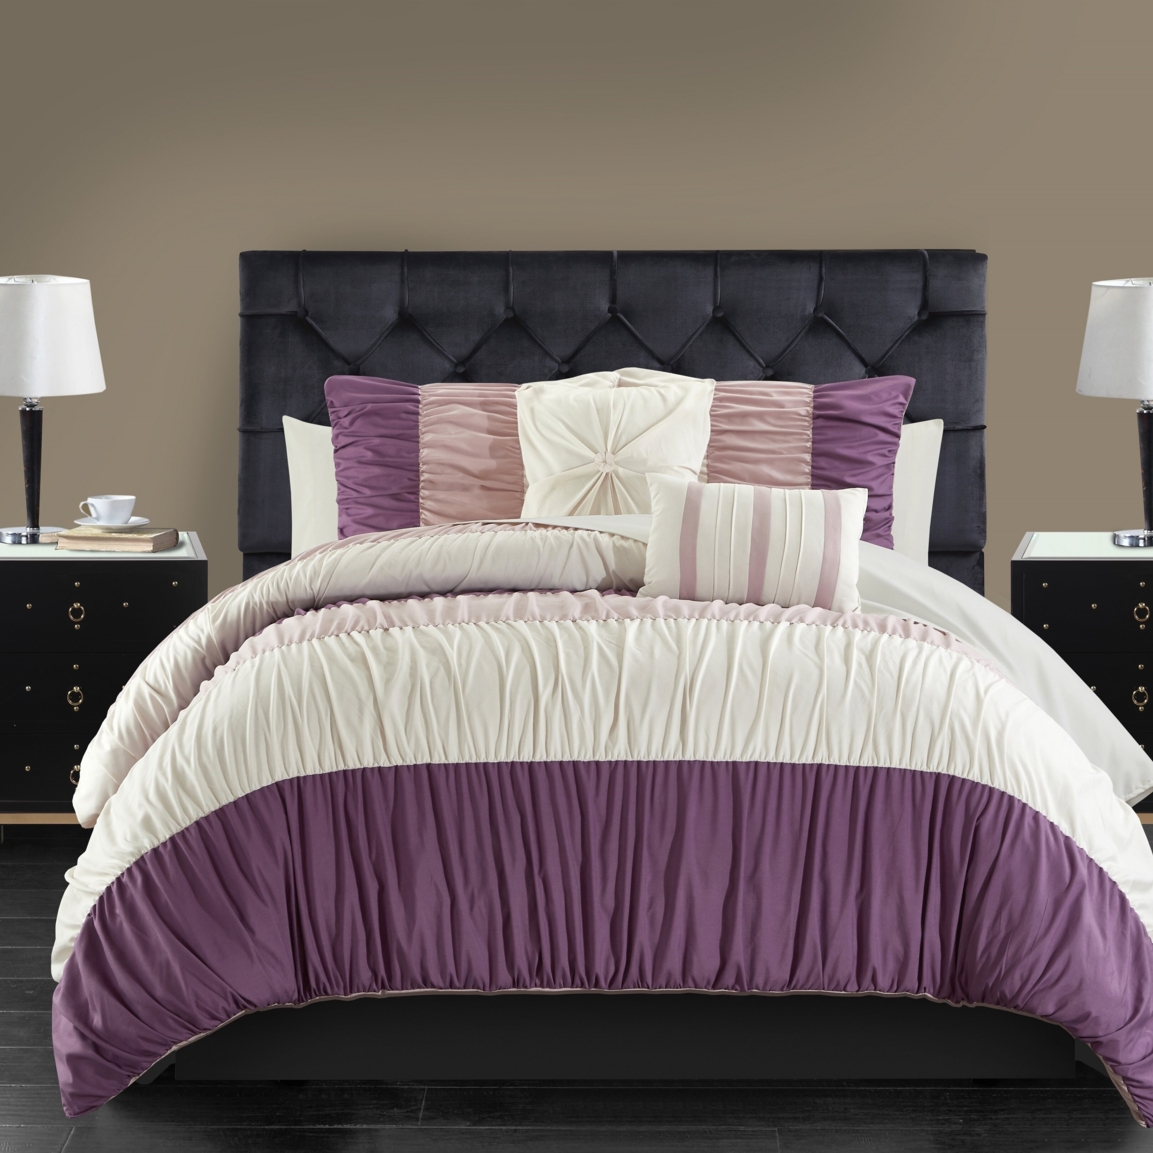 Faye 9 Or 7 Piece Comforter Ruched Color Block Bed In A Bag - Purple, King - 9 Piece